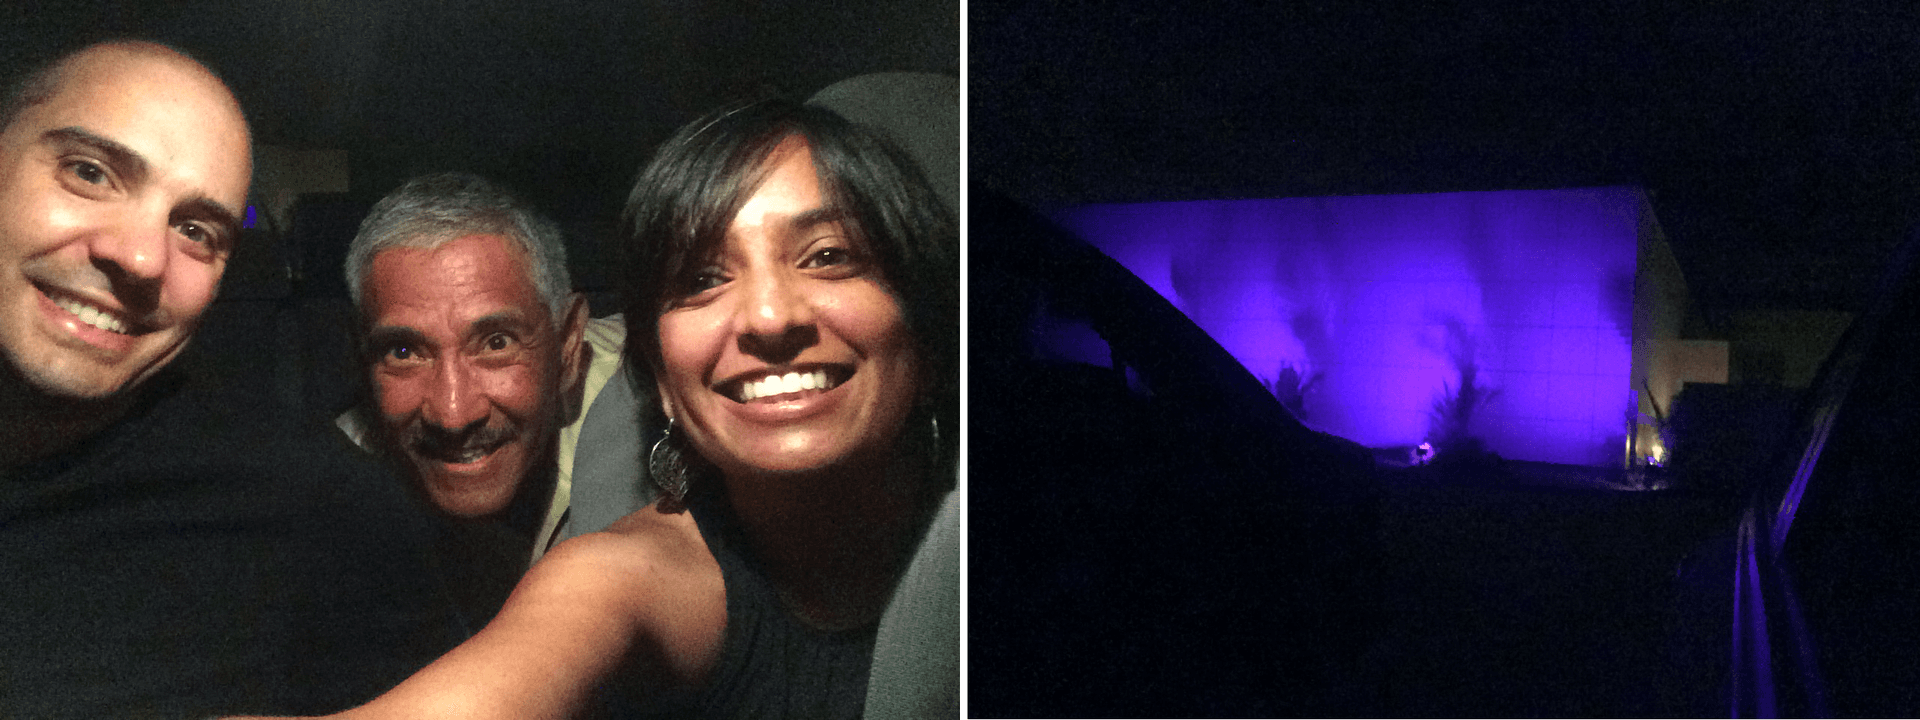 On the left, a selfie of the author and colleagues in their car in front of Paisley Park. On the right, a purple building at night.